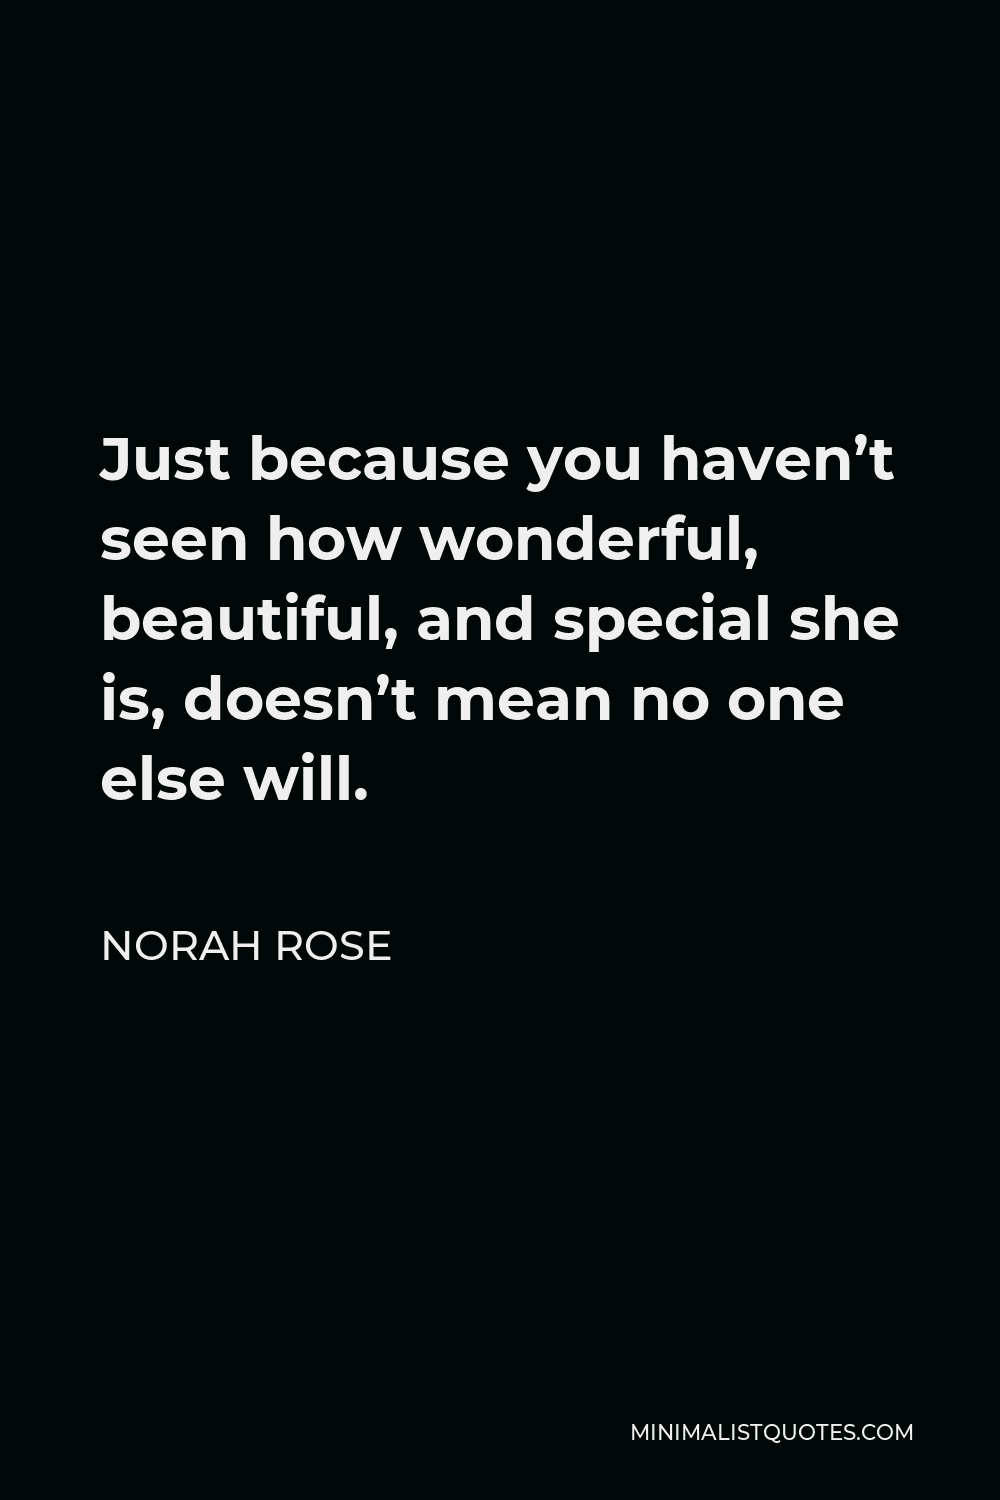 Norah Rose Quote - Just because you haven’t seen how wonderful, beautiful, and special she is, doesn’t mean no one else will.